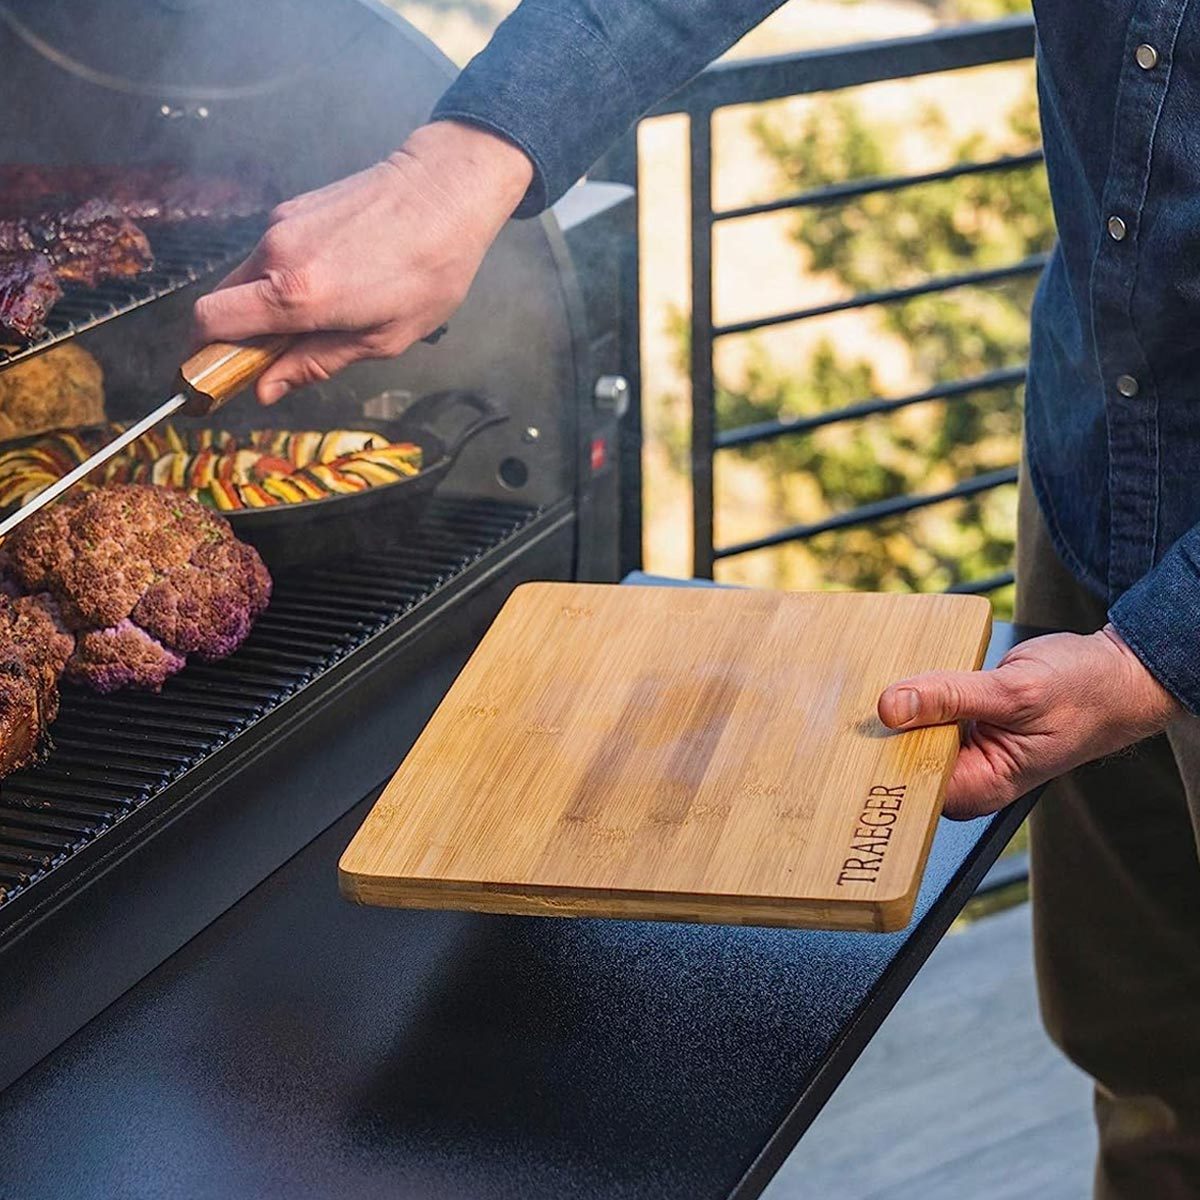 Recommended Pellet Grill Accessories